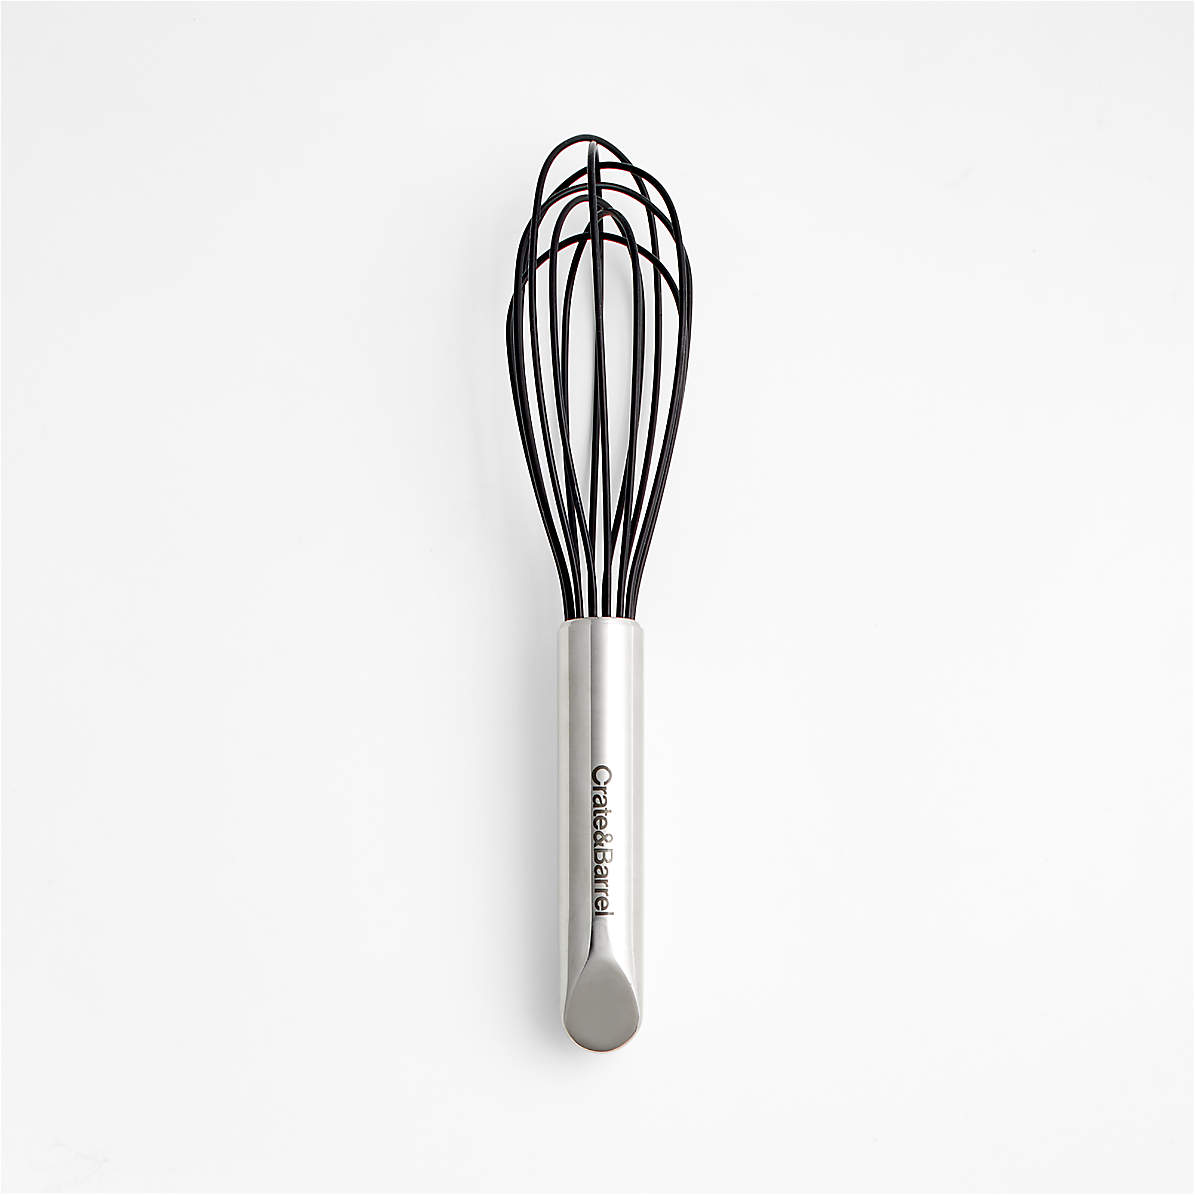 Crate & Barrel Black Silicone and Stainless Steel Jar Scraper + Reviews